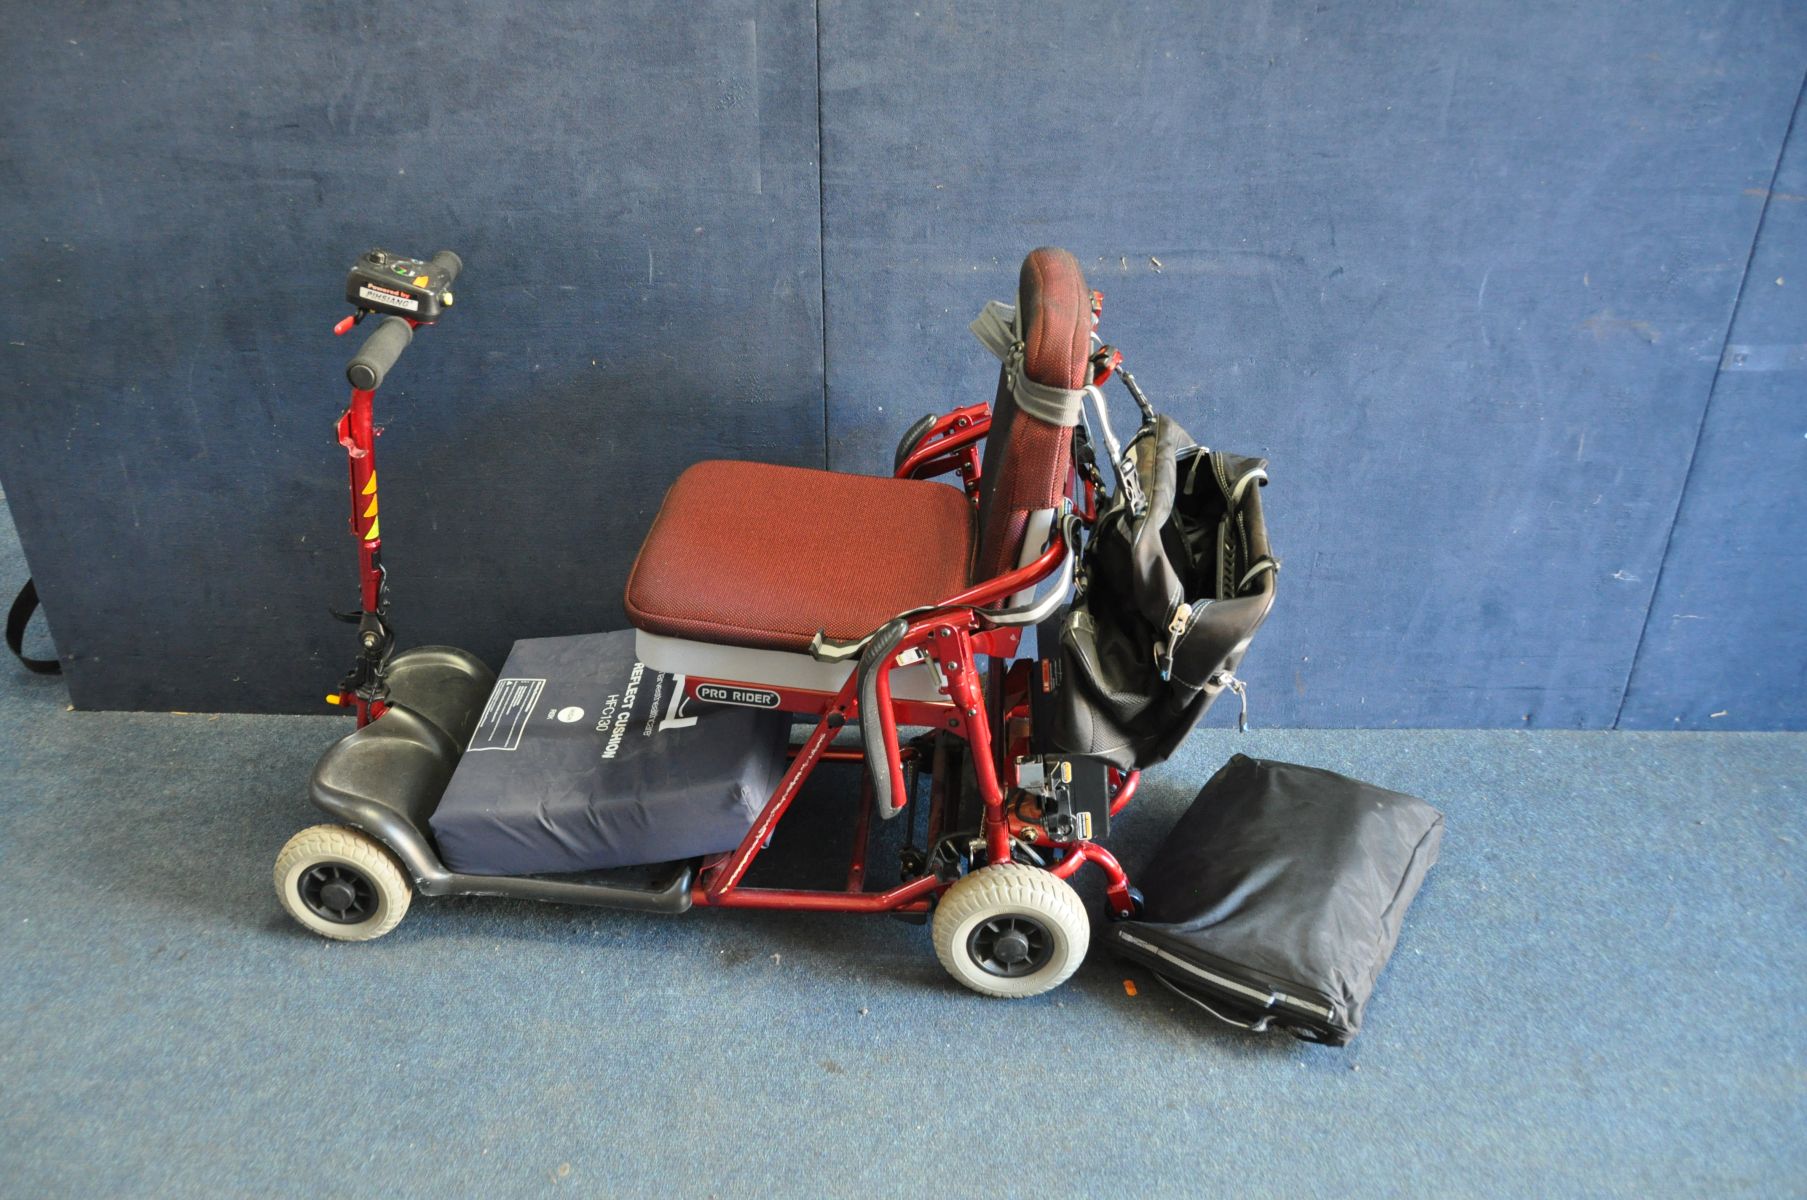 A PRO RIDER TE-FS4 FOLDING DISABILITY SCOOTER with charger and rain cover